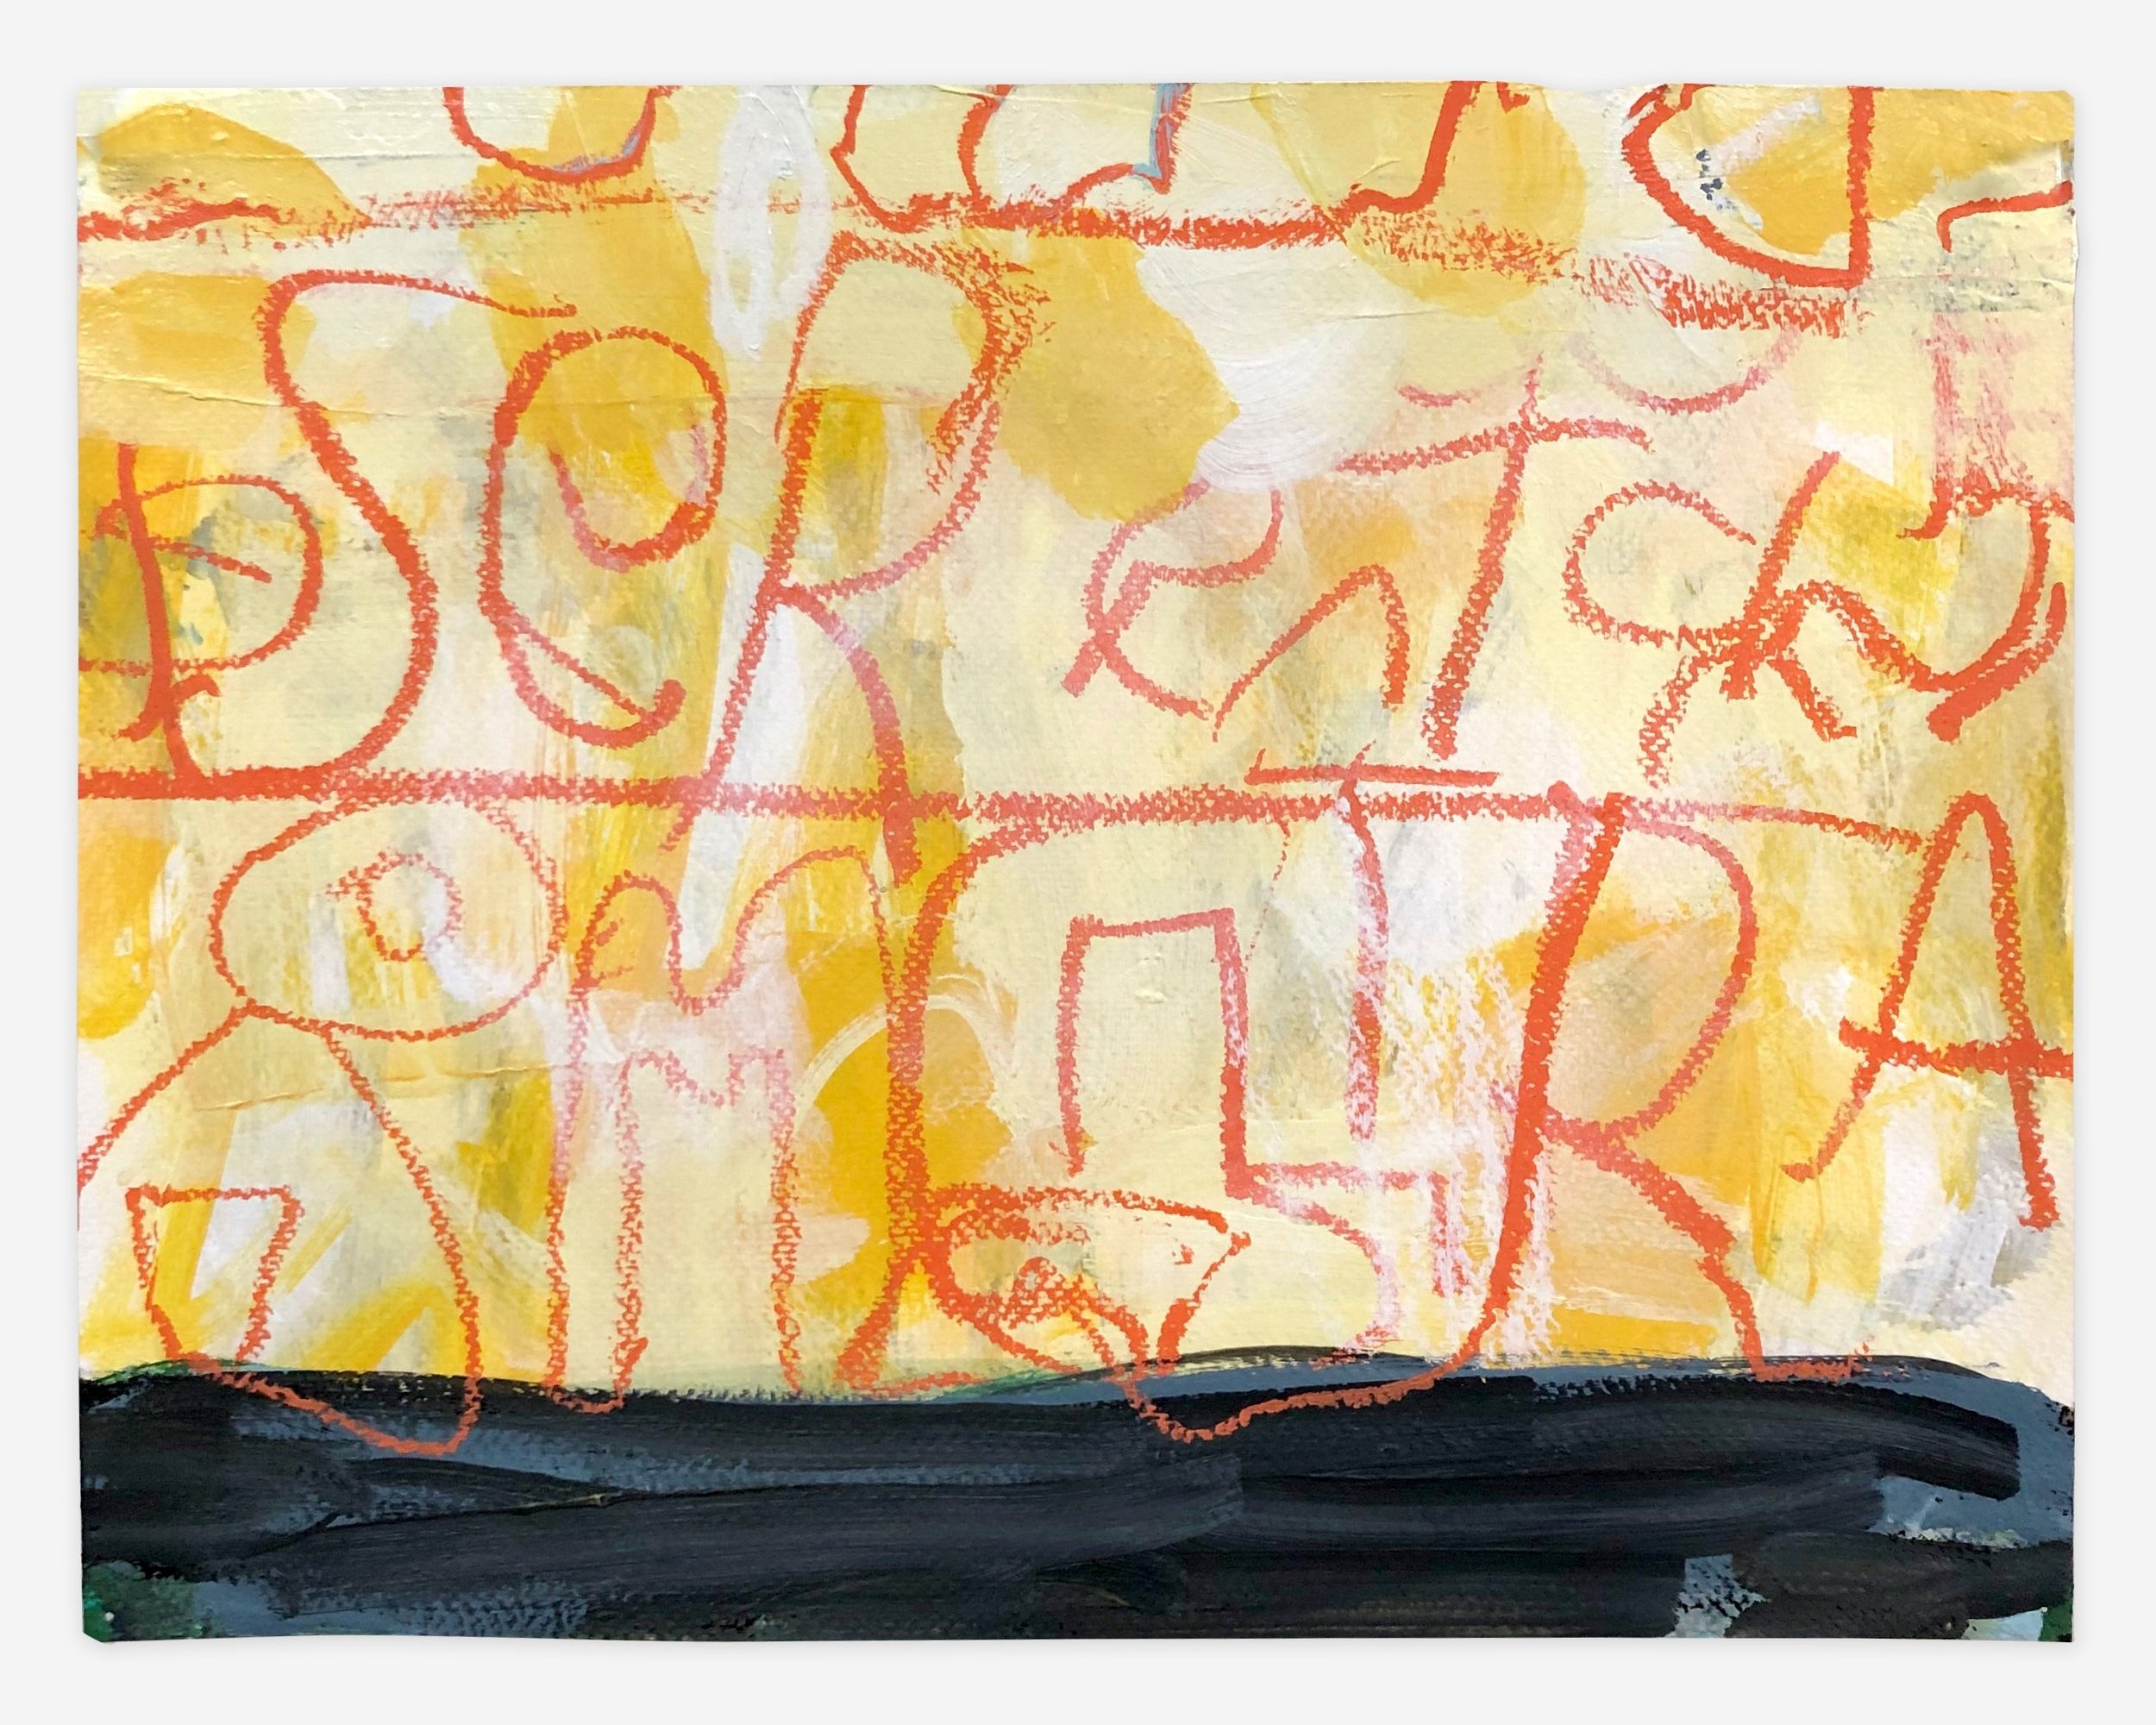   Untitled (051119b,)  mixed media on paper, 11" x 14", 2019 